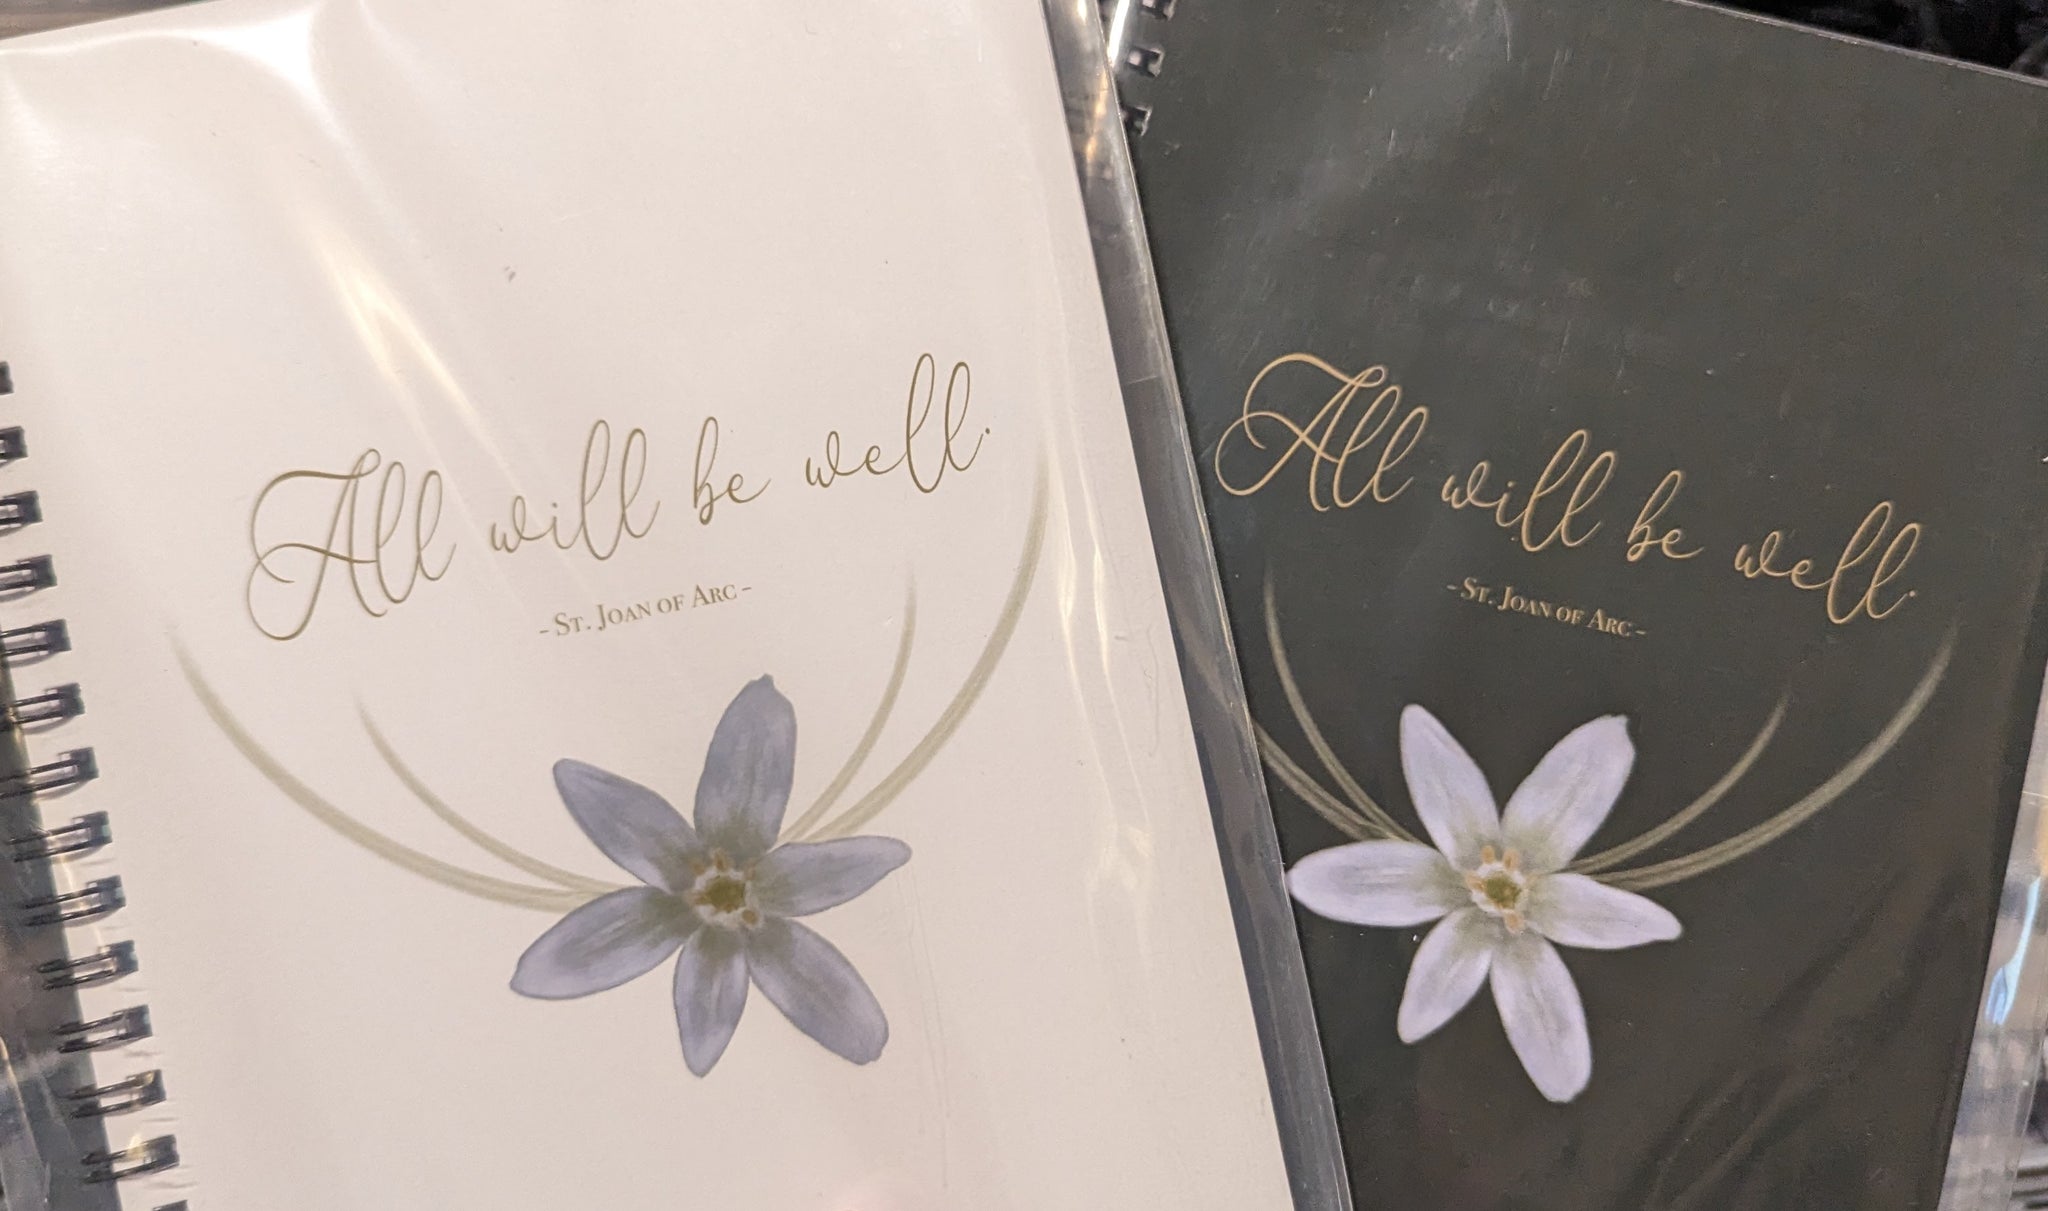 Two Catholic spiral notebooks or journals. The covers feature the quote from St. Joan of Arc "All will be Well" as well as the Star of Bethlehem flower.